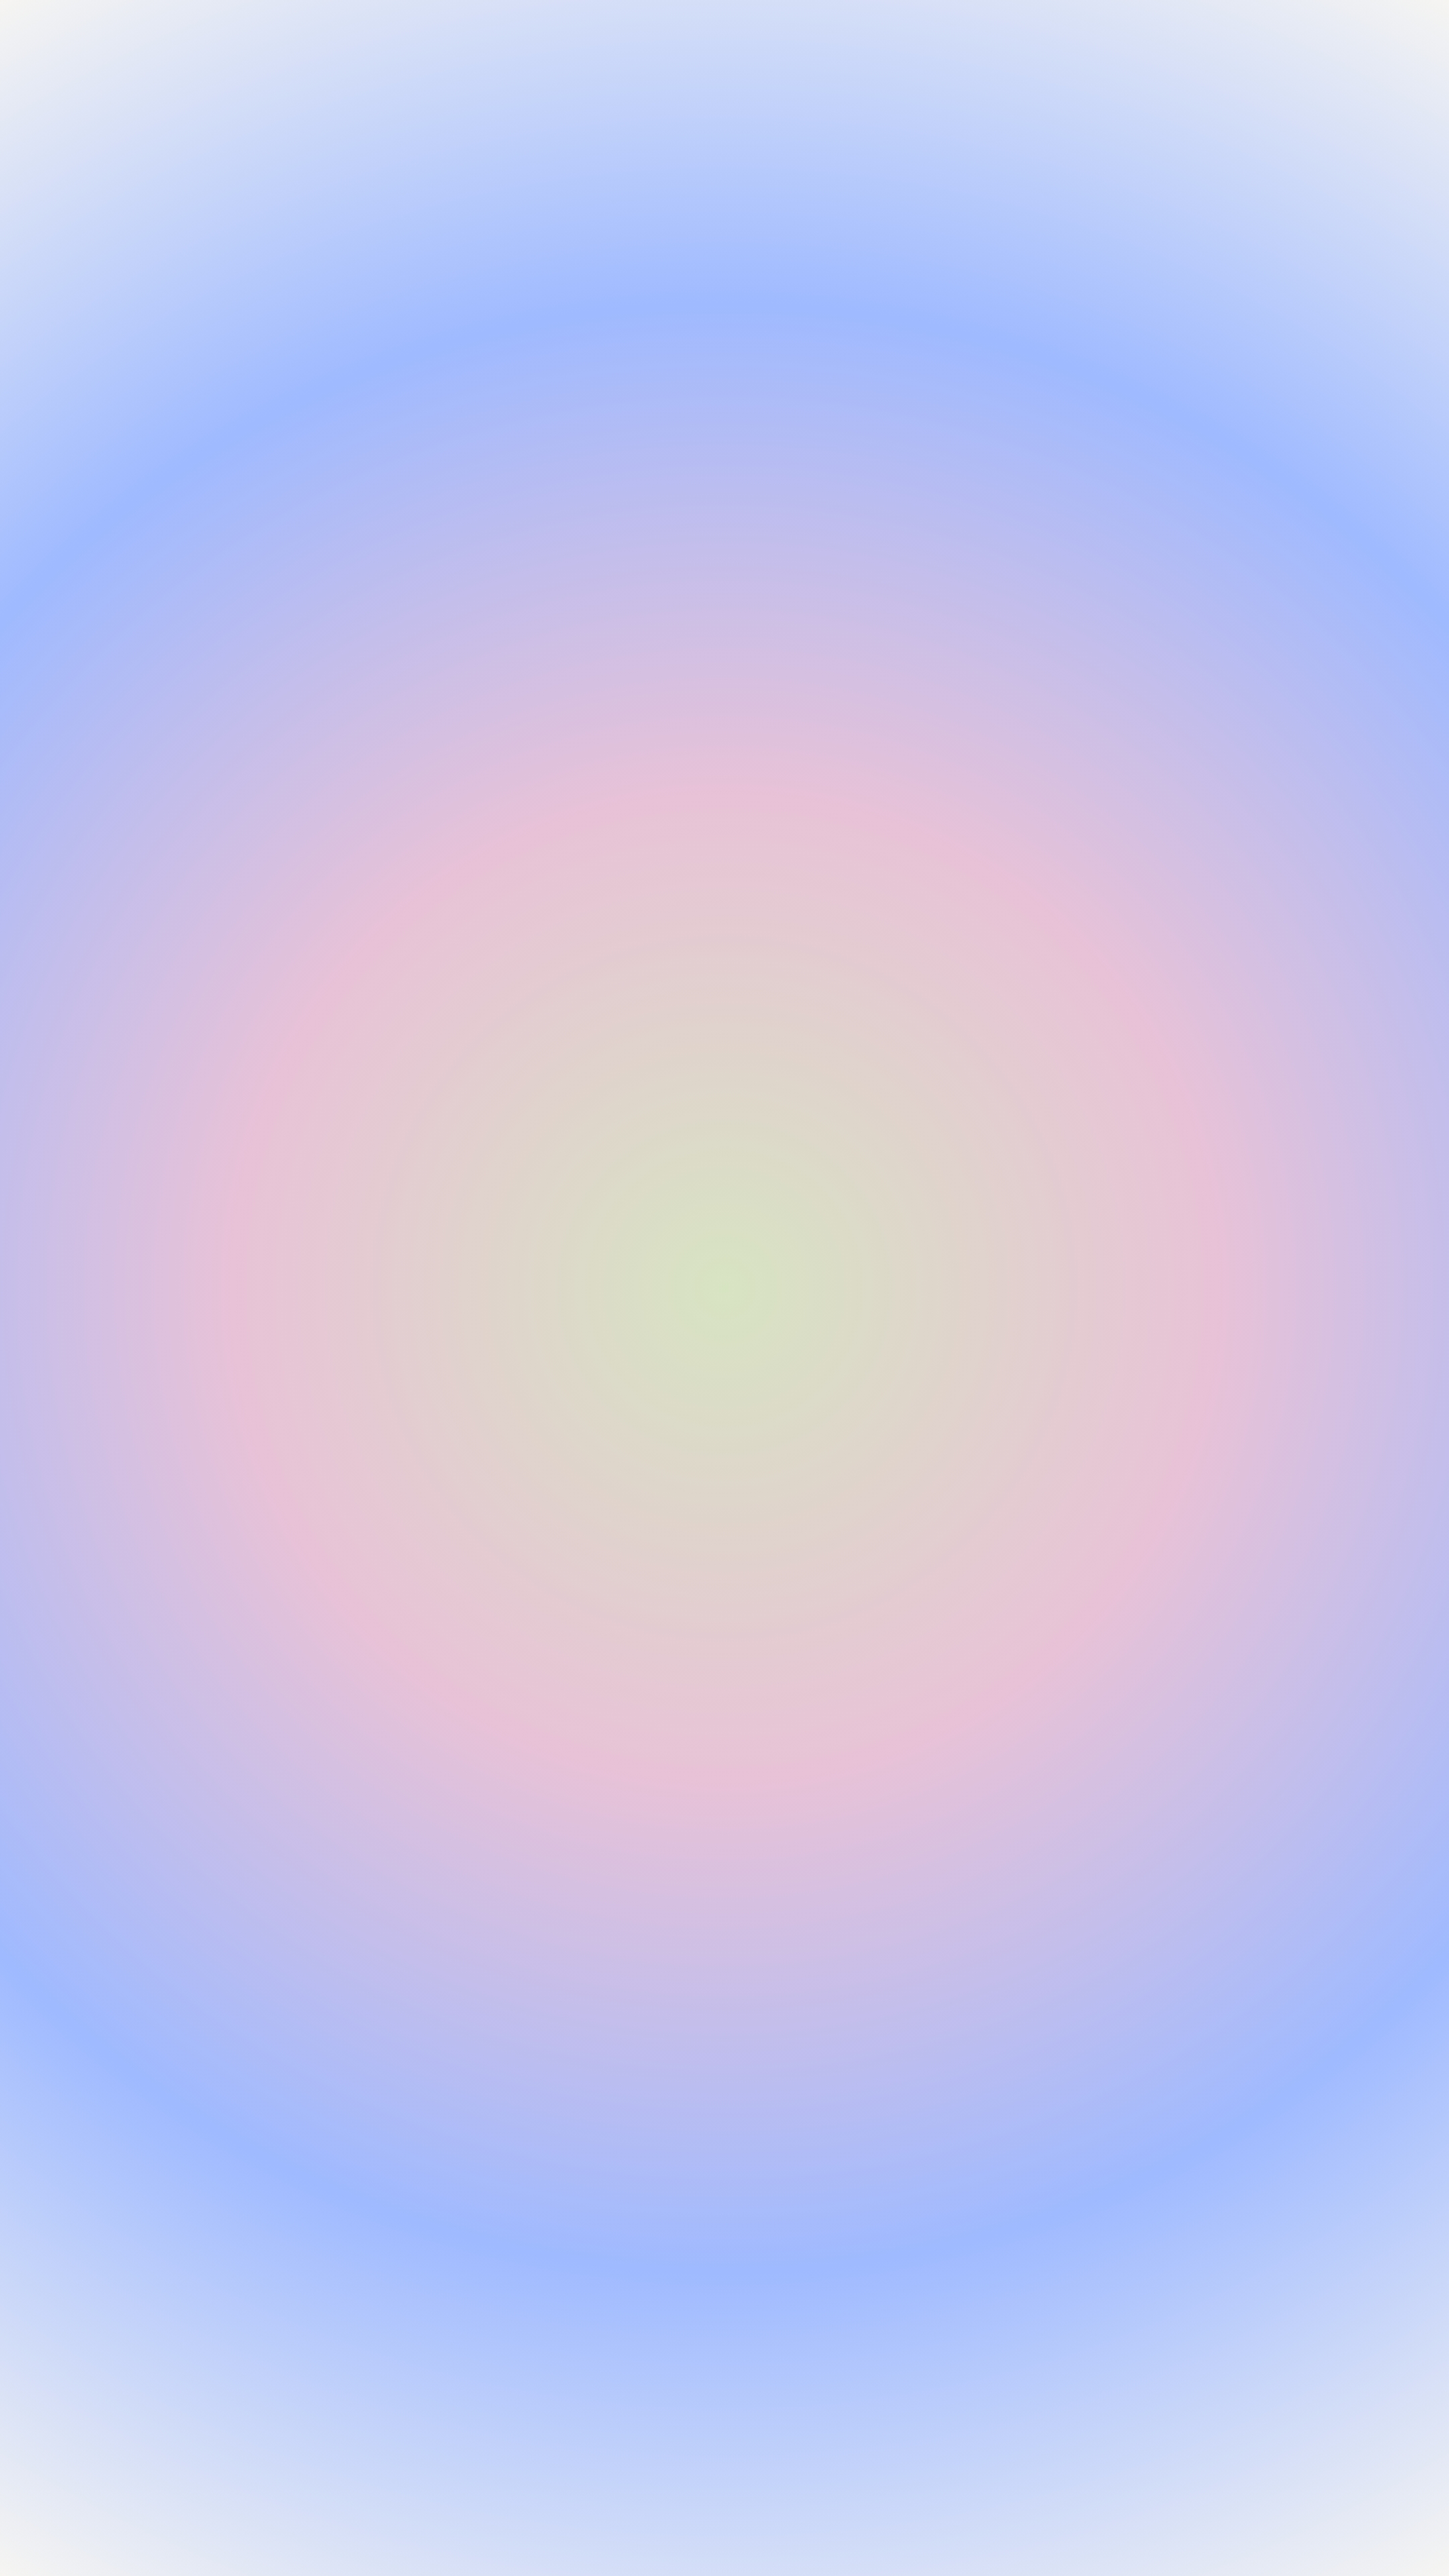 Soothing Pastel Gradient Sky Ταπετσαρία[a0eec64c9c8b4f98bd7d]